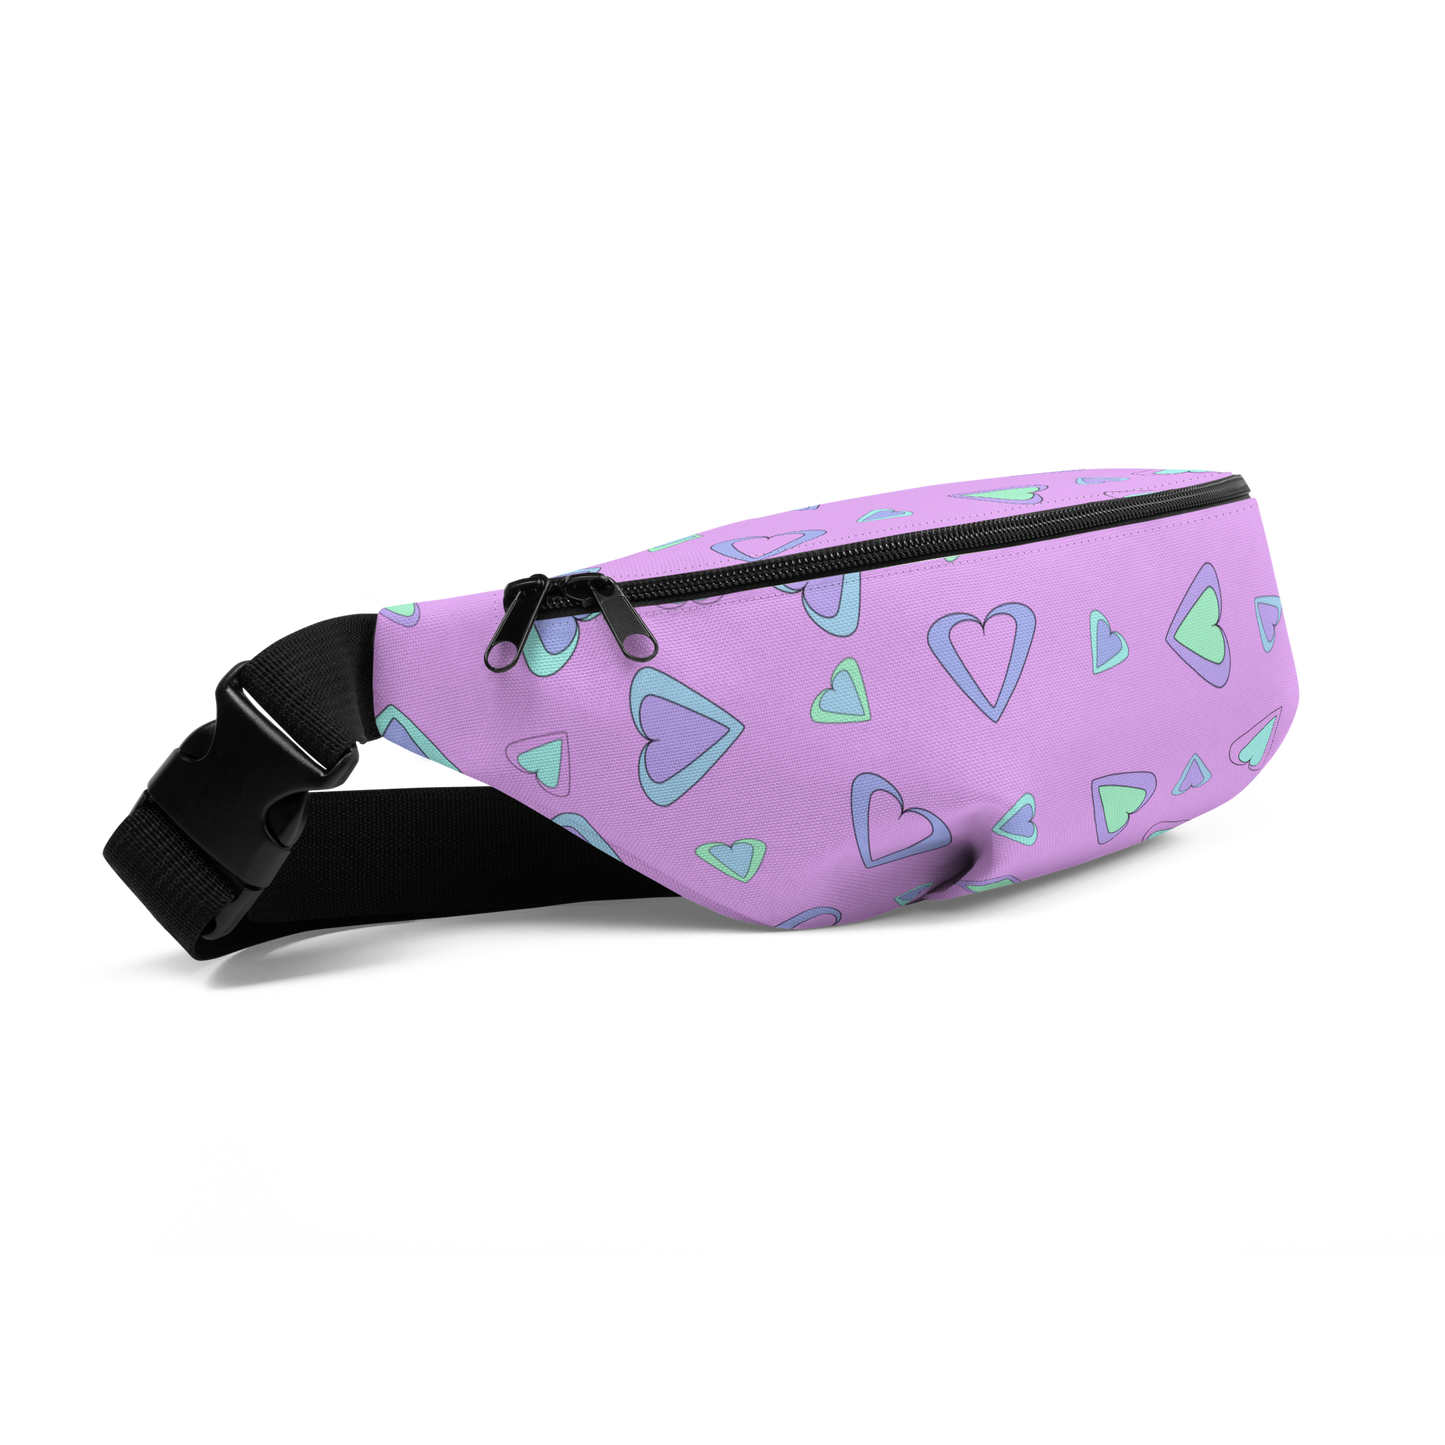 Rainbow Of Hearts | Batch 01 | Seamless Patterns | All-Over Print Fanny Pack - #5